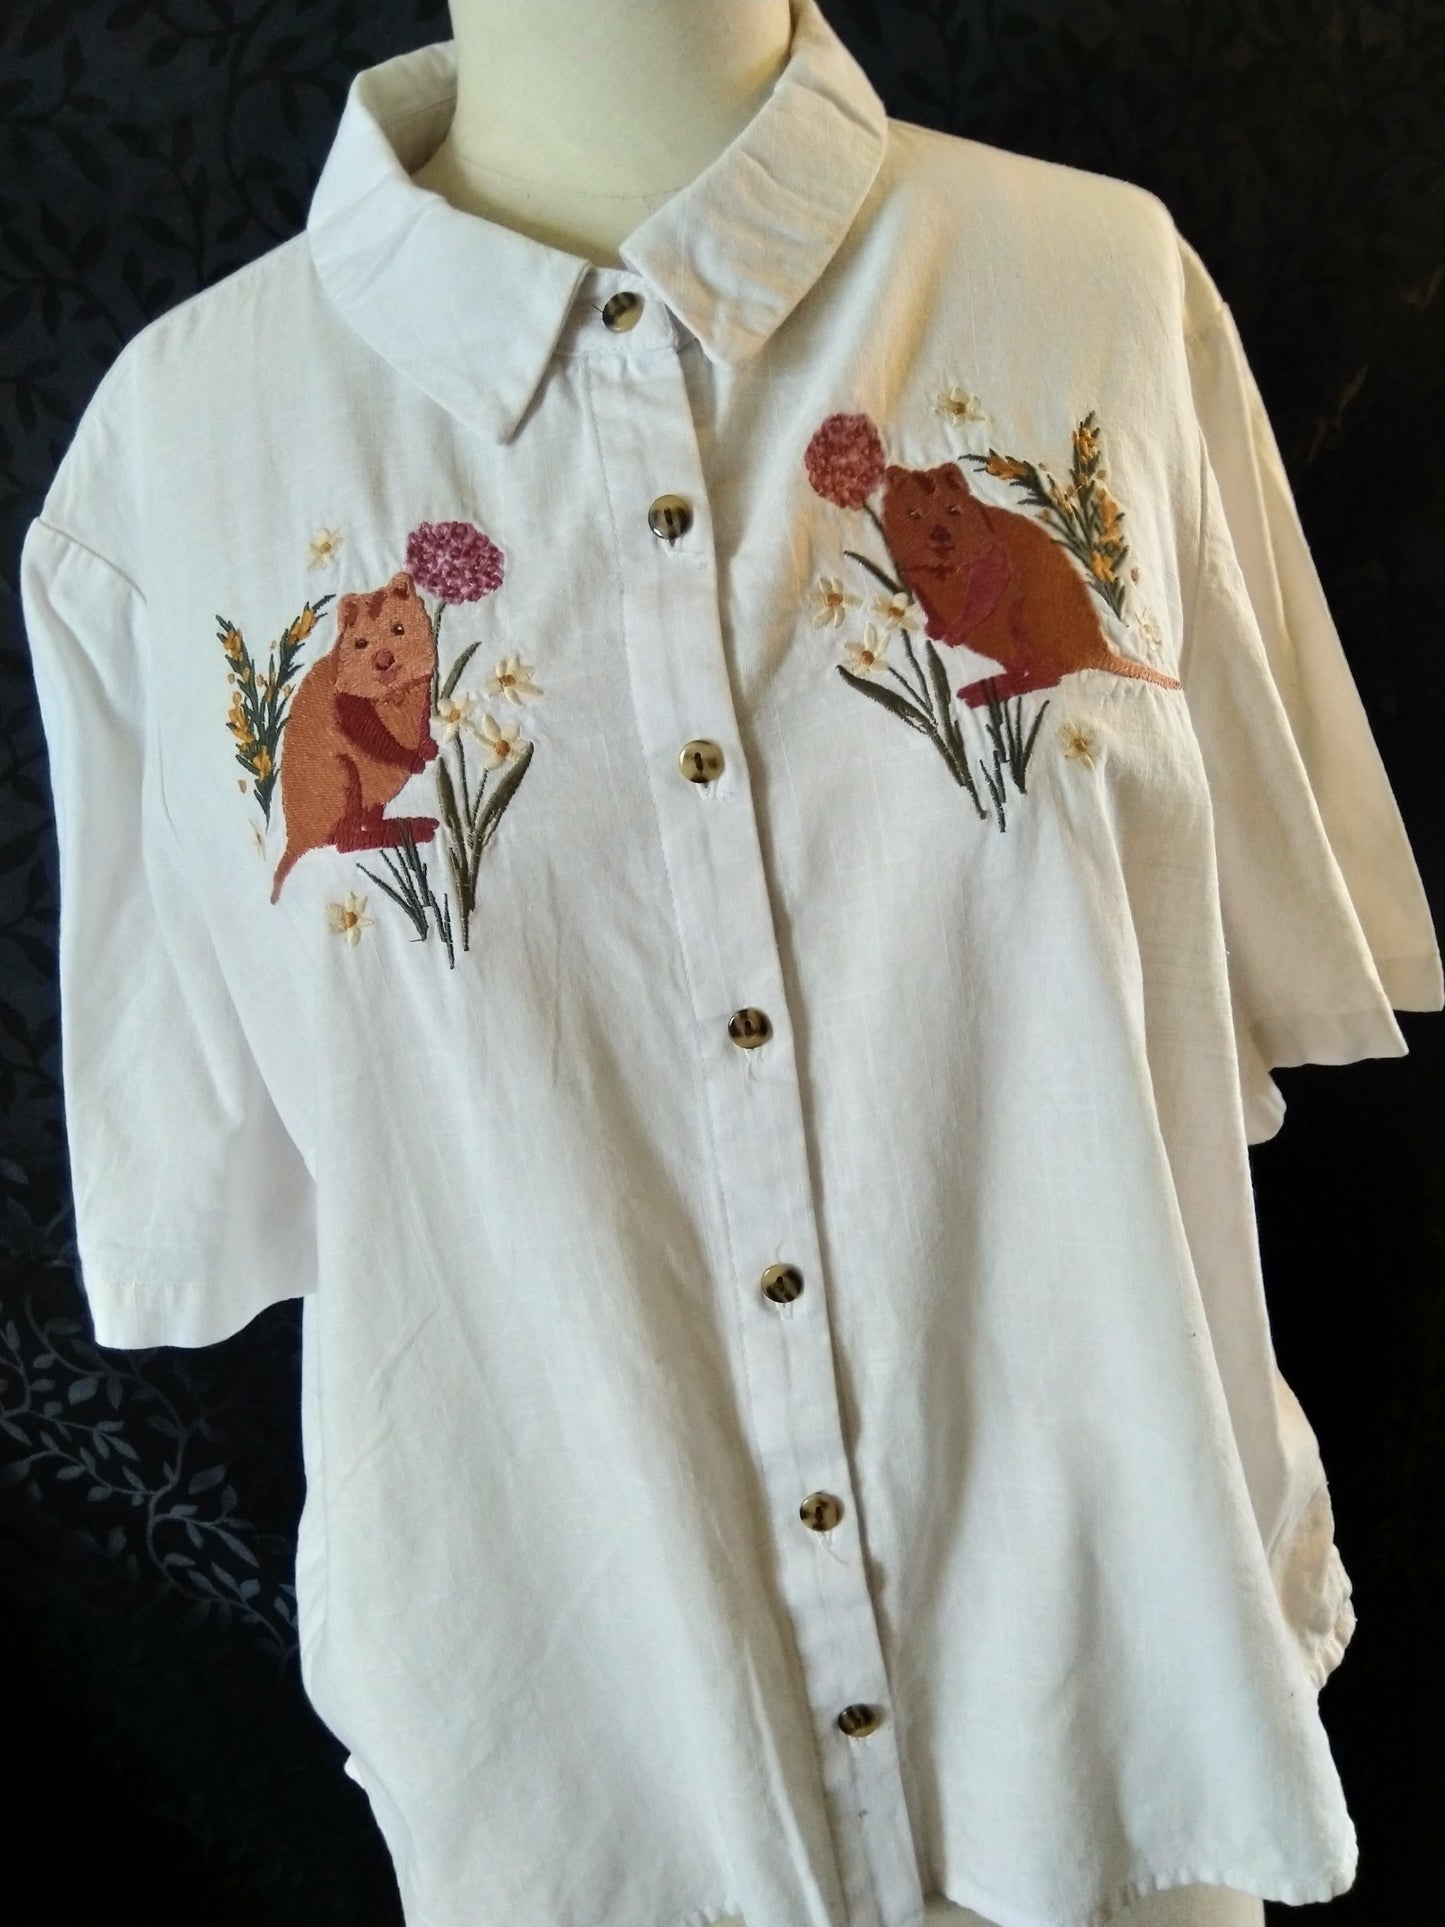 What in the Australian animal shirt is this? Sz 14